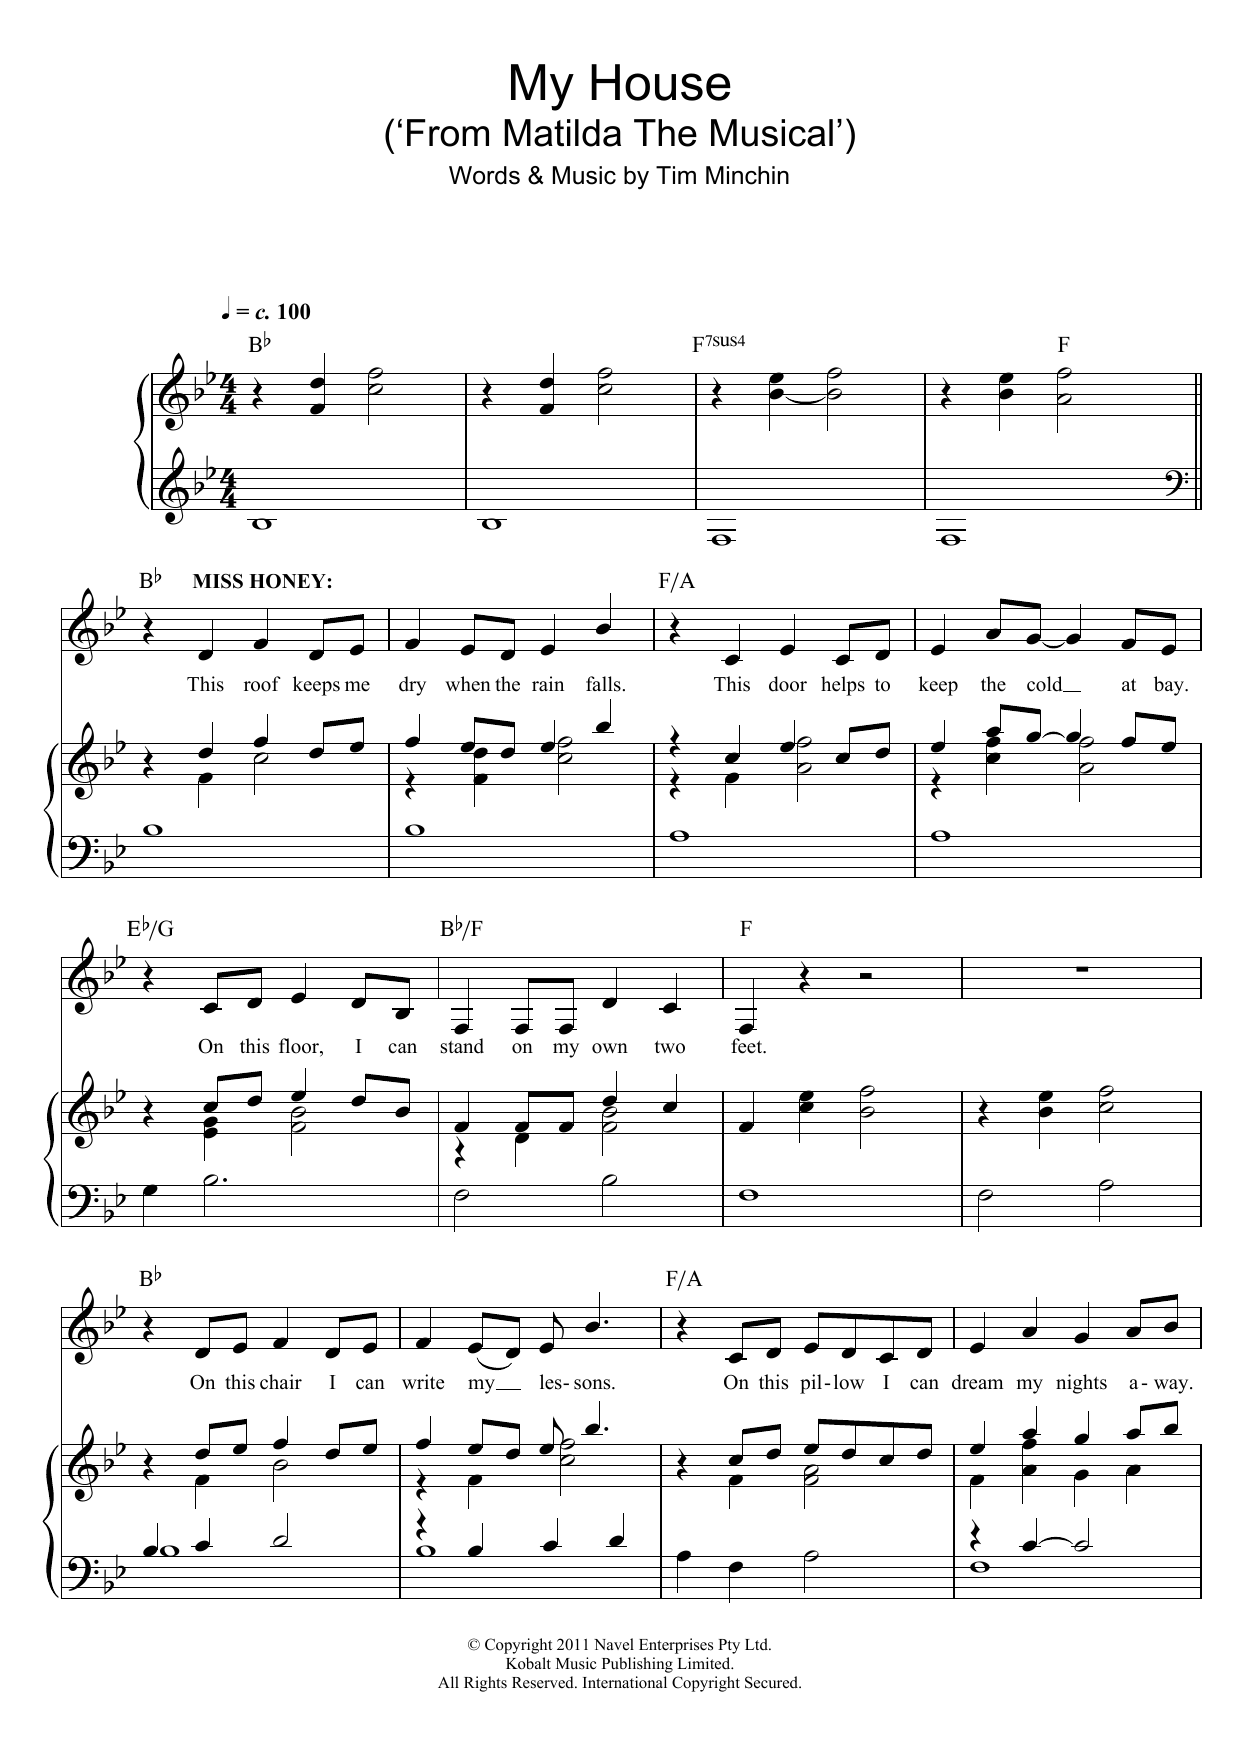 Download Tim Minchin My House (from Matilda the Musical) Sheet Music